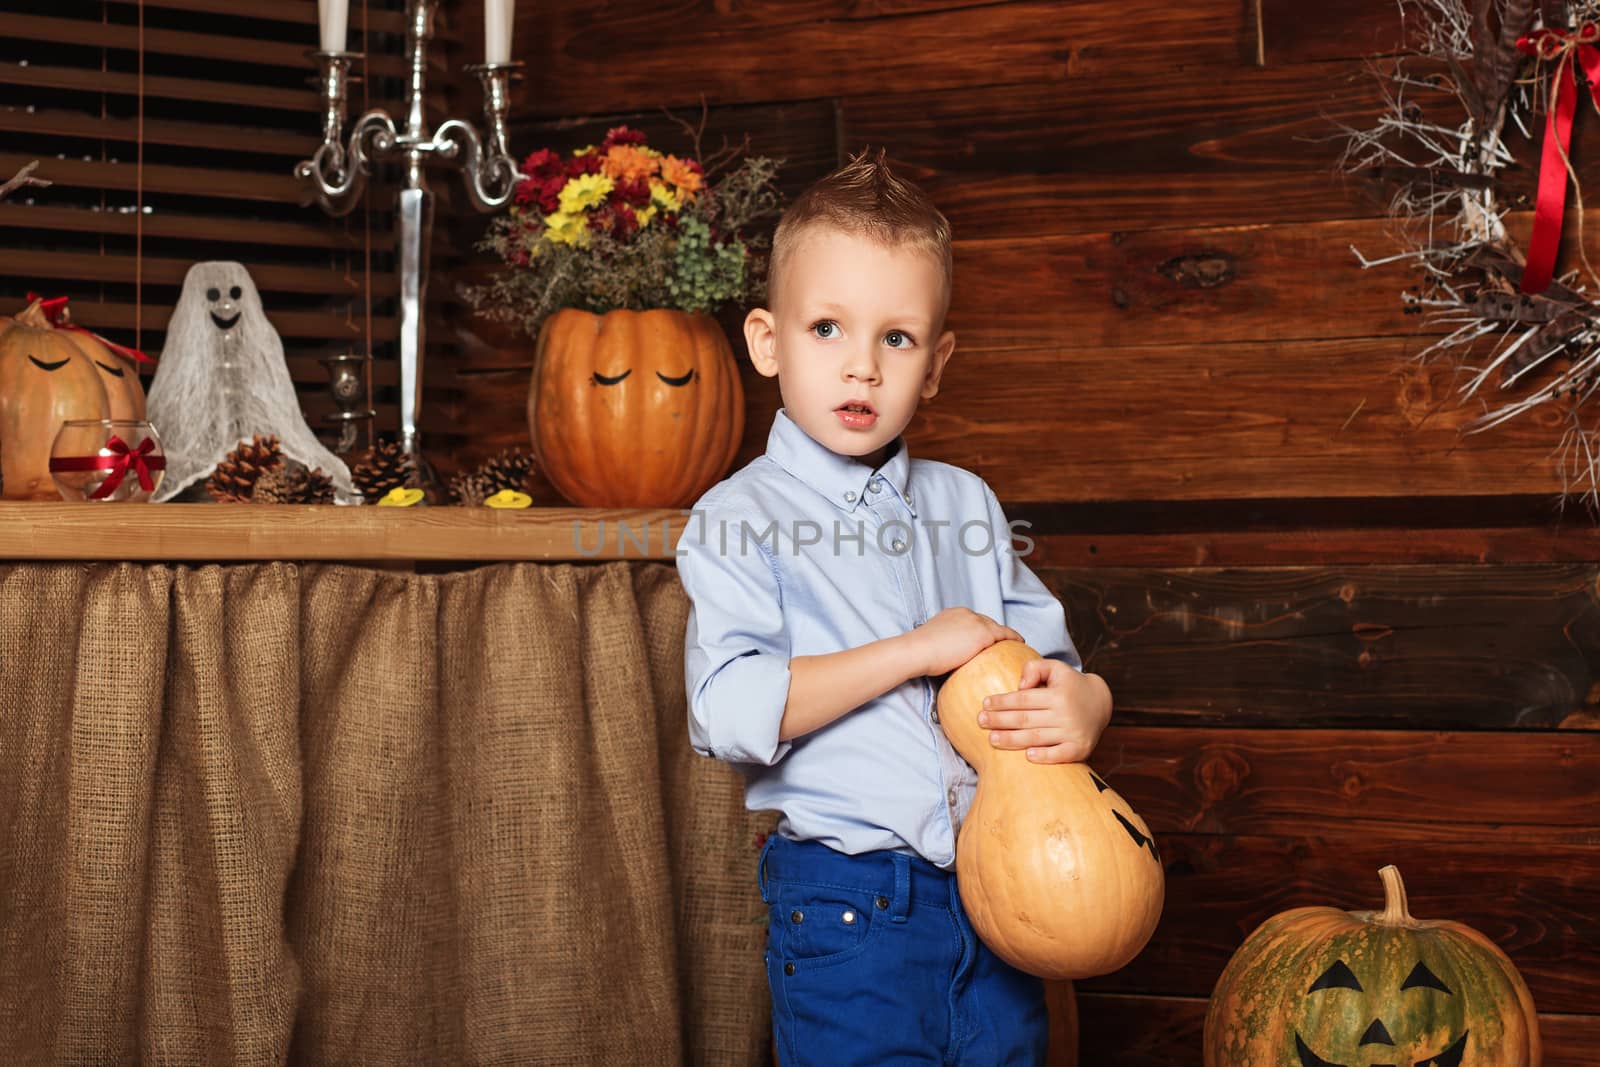 Cute Little Boy having fun in Halloween decorations. Halloween party with child holding painted pumpkin. Your text